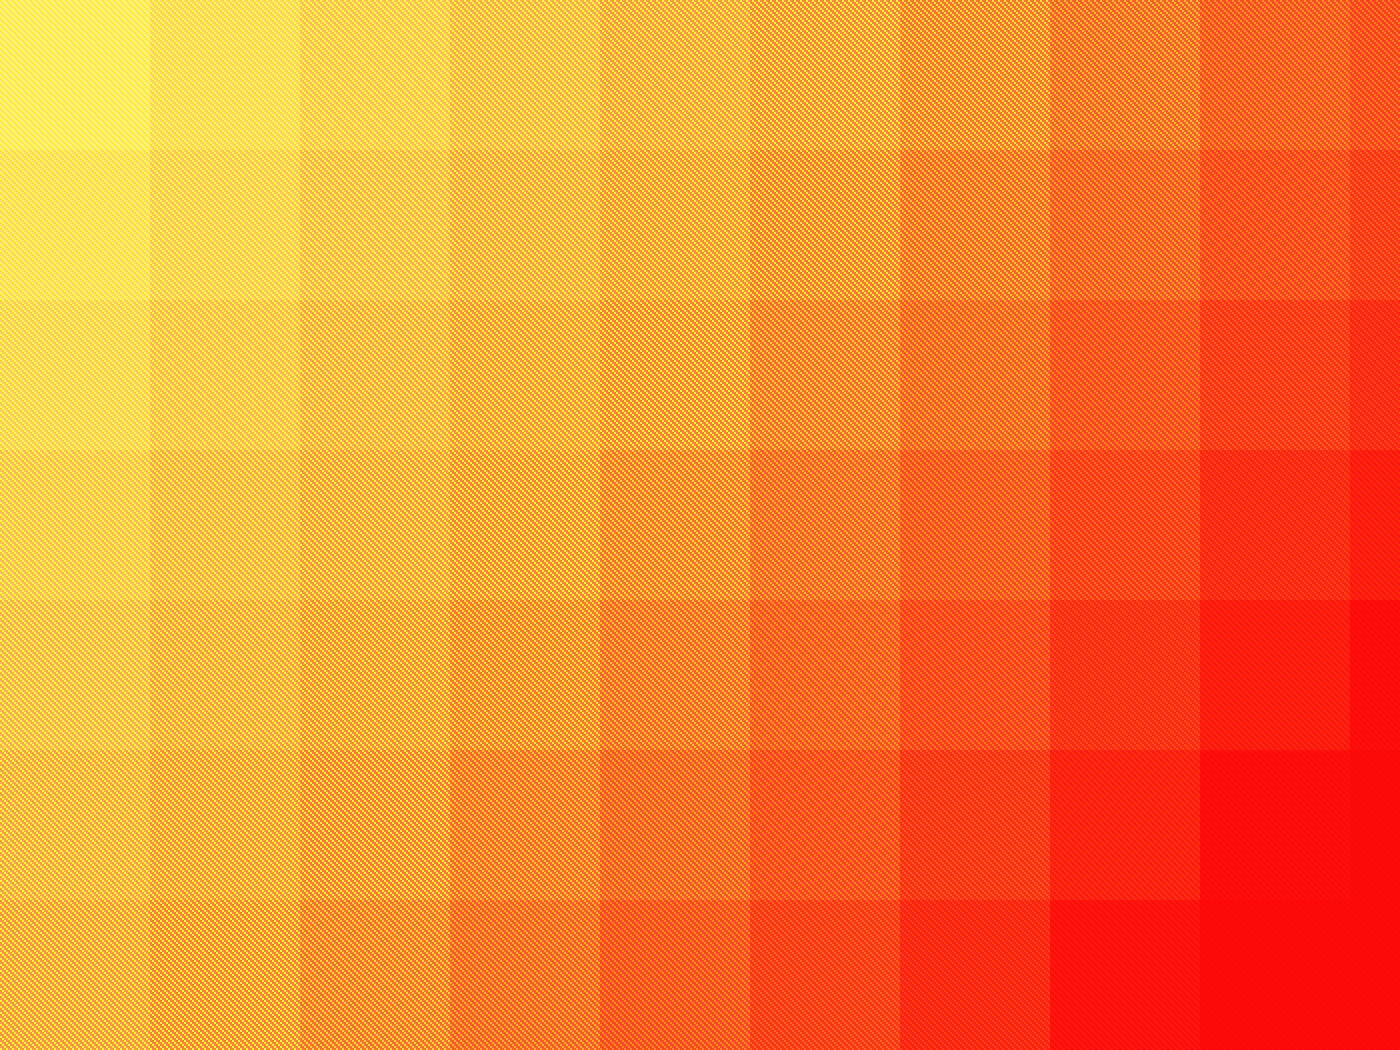 Red and Orange Square Logo - pattern orange squares / 1400x1050 Wallpaper | Yellow: + Red and ...